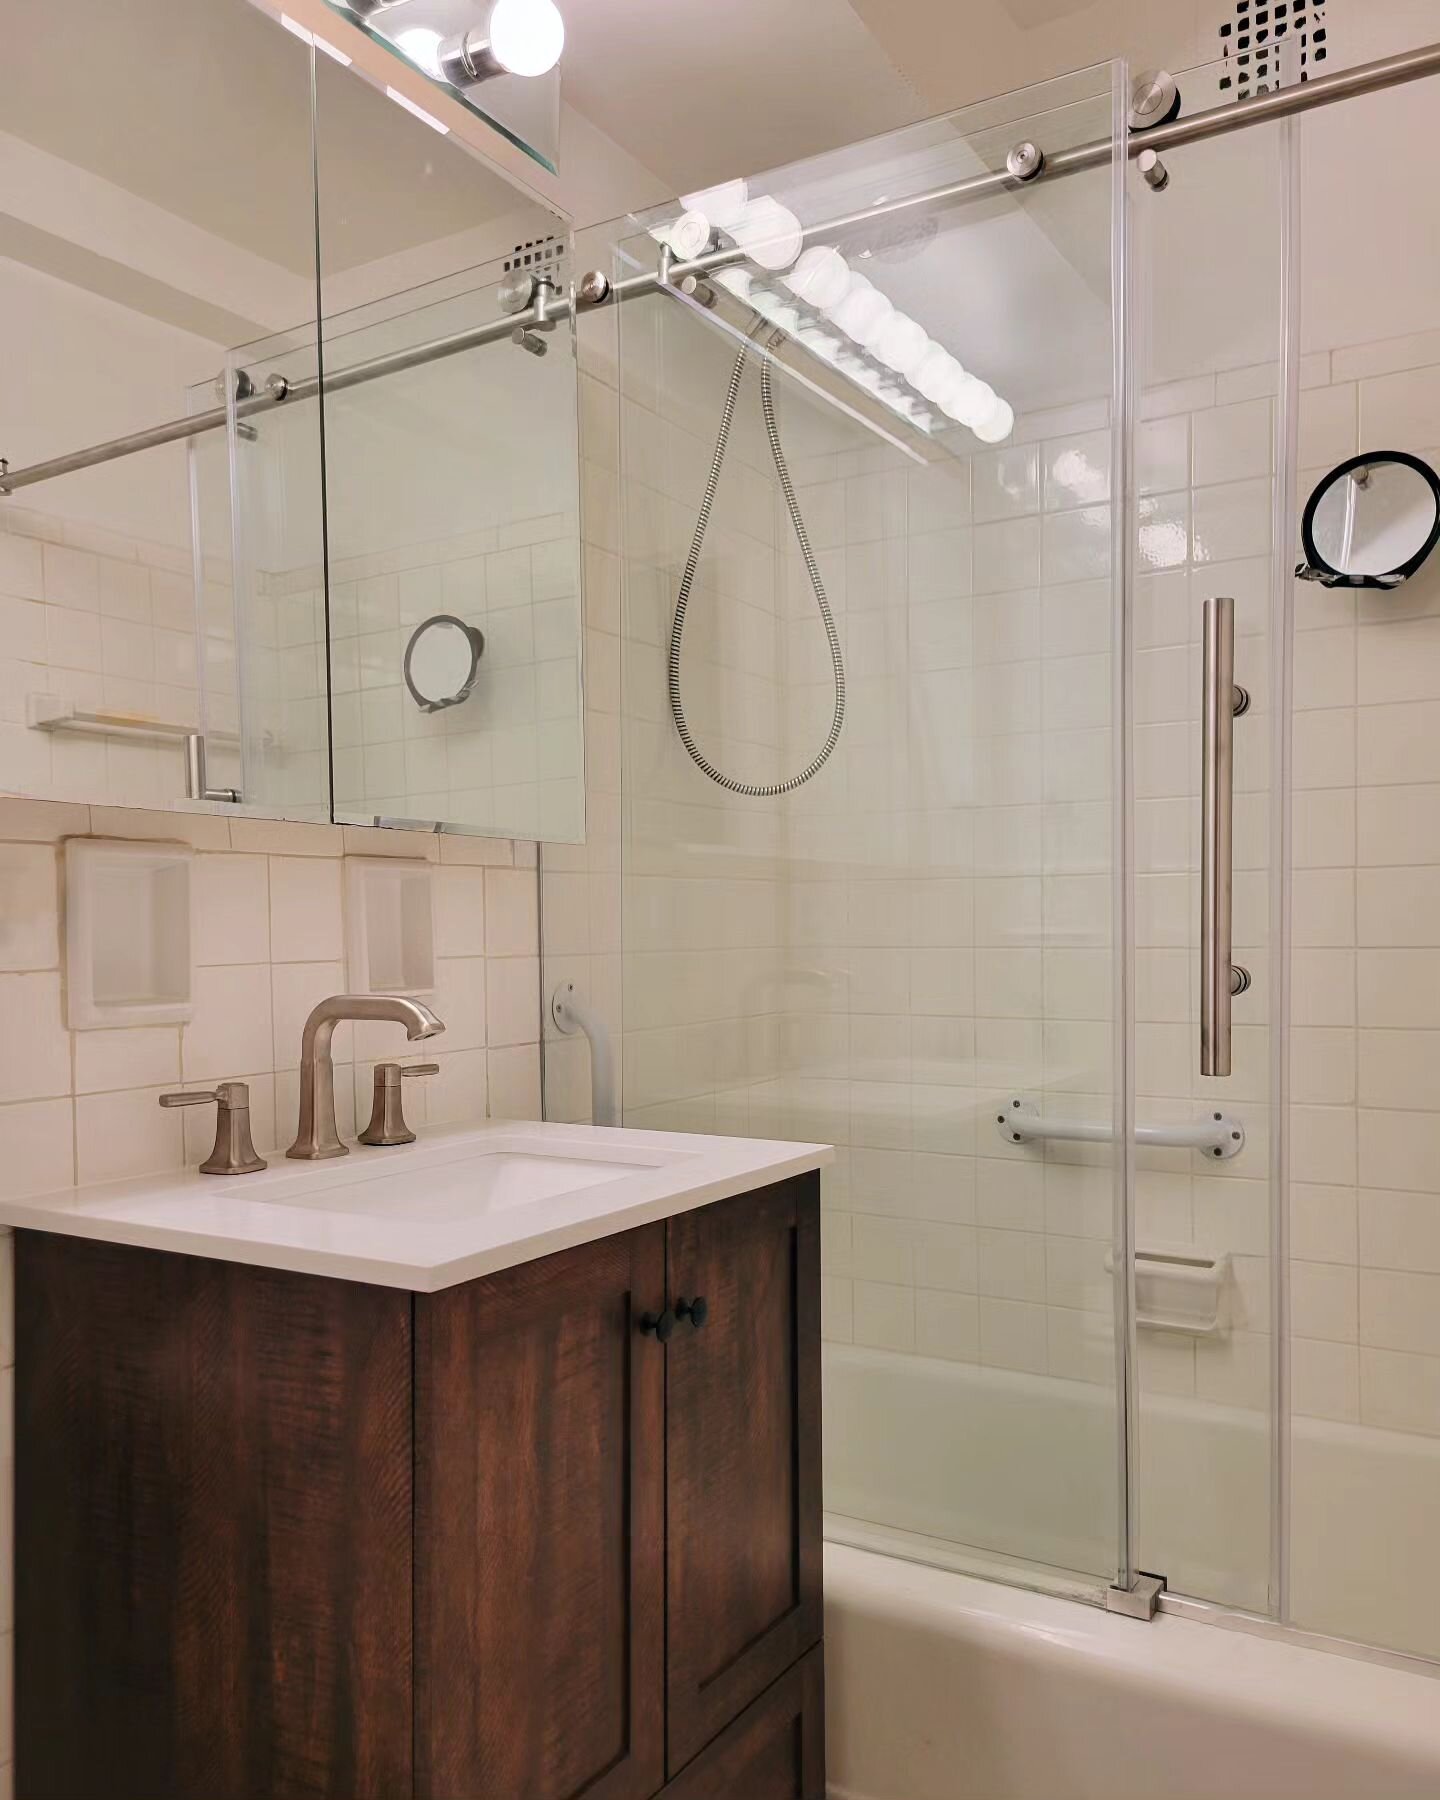 New vanity and new shower glass for our clients on the Upper East Side
.
..
...
#bathroomdesign #bathroominspo #bathroomreno #potterybarn #ues #uppereastside #apartmentdesign #apartmentreno #generalcontractor #nycrealestate #wayfair #womeninconstruct